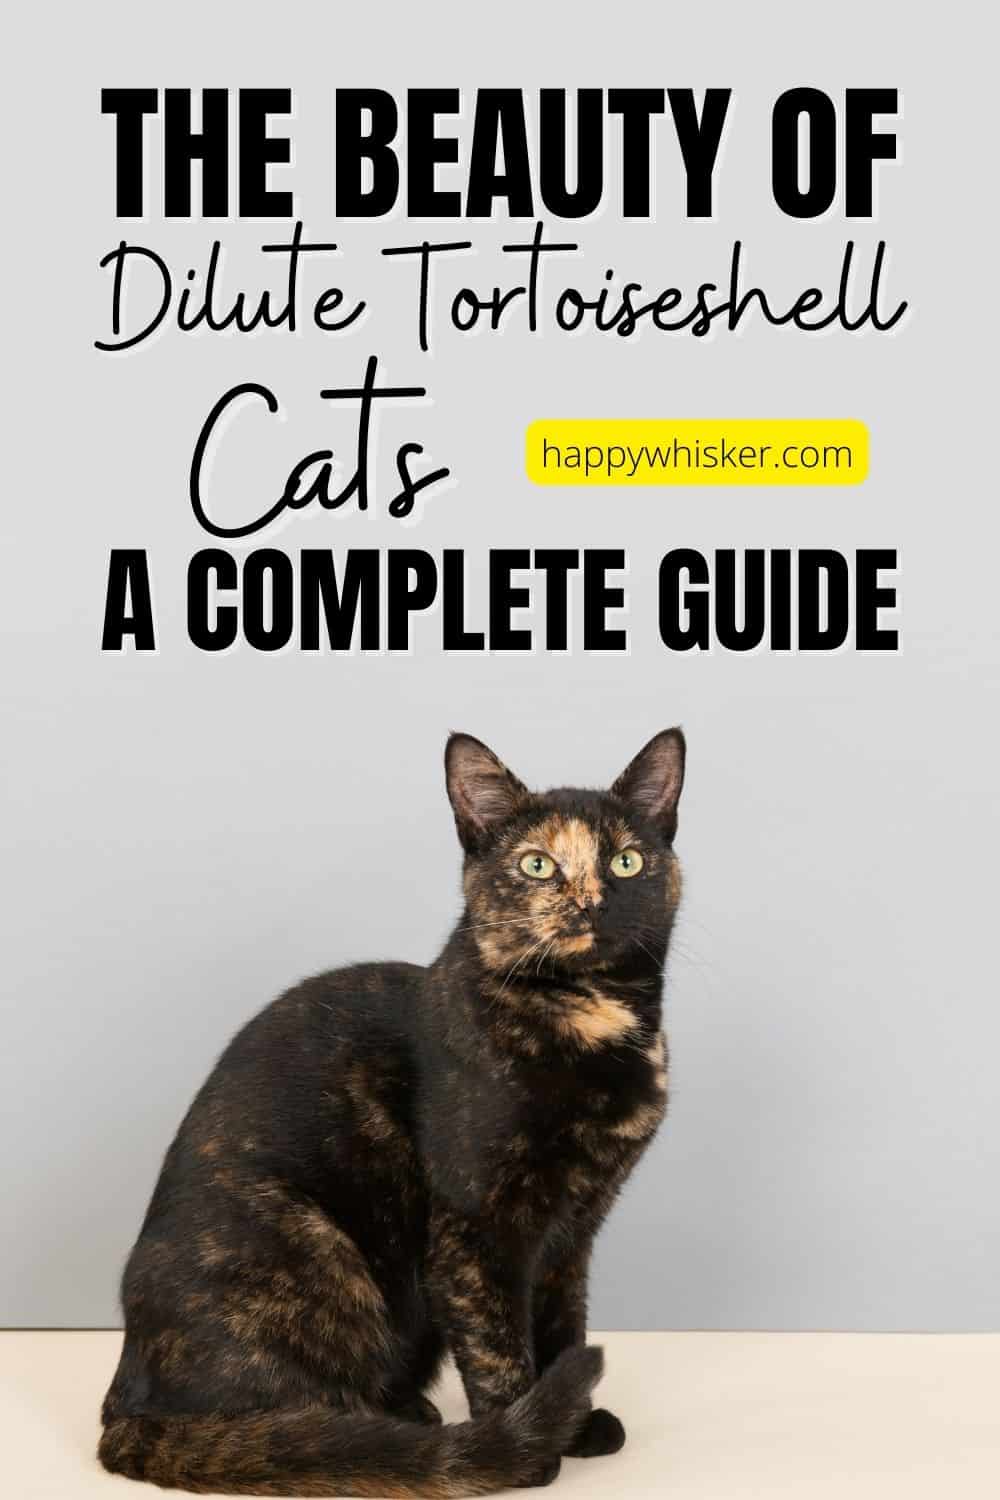 The Beauty Of Dilute Tortoiseshell Cats - A Complete Guide Pinterest